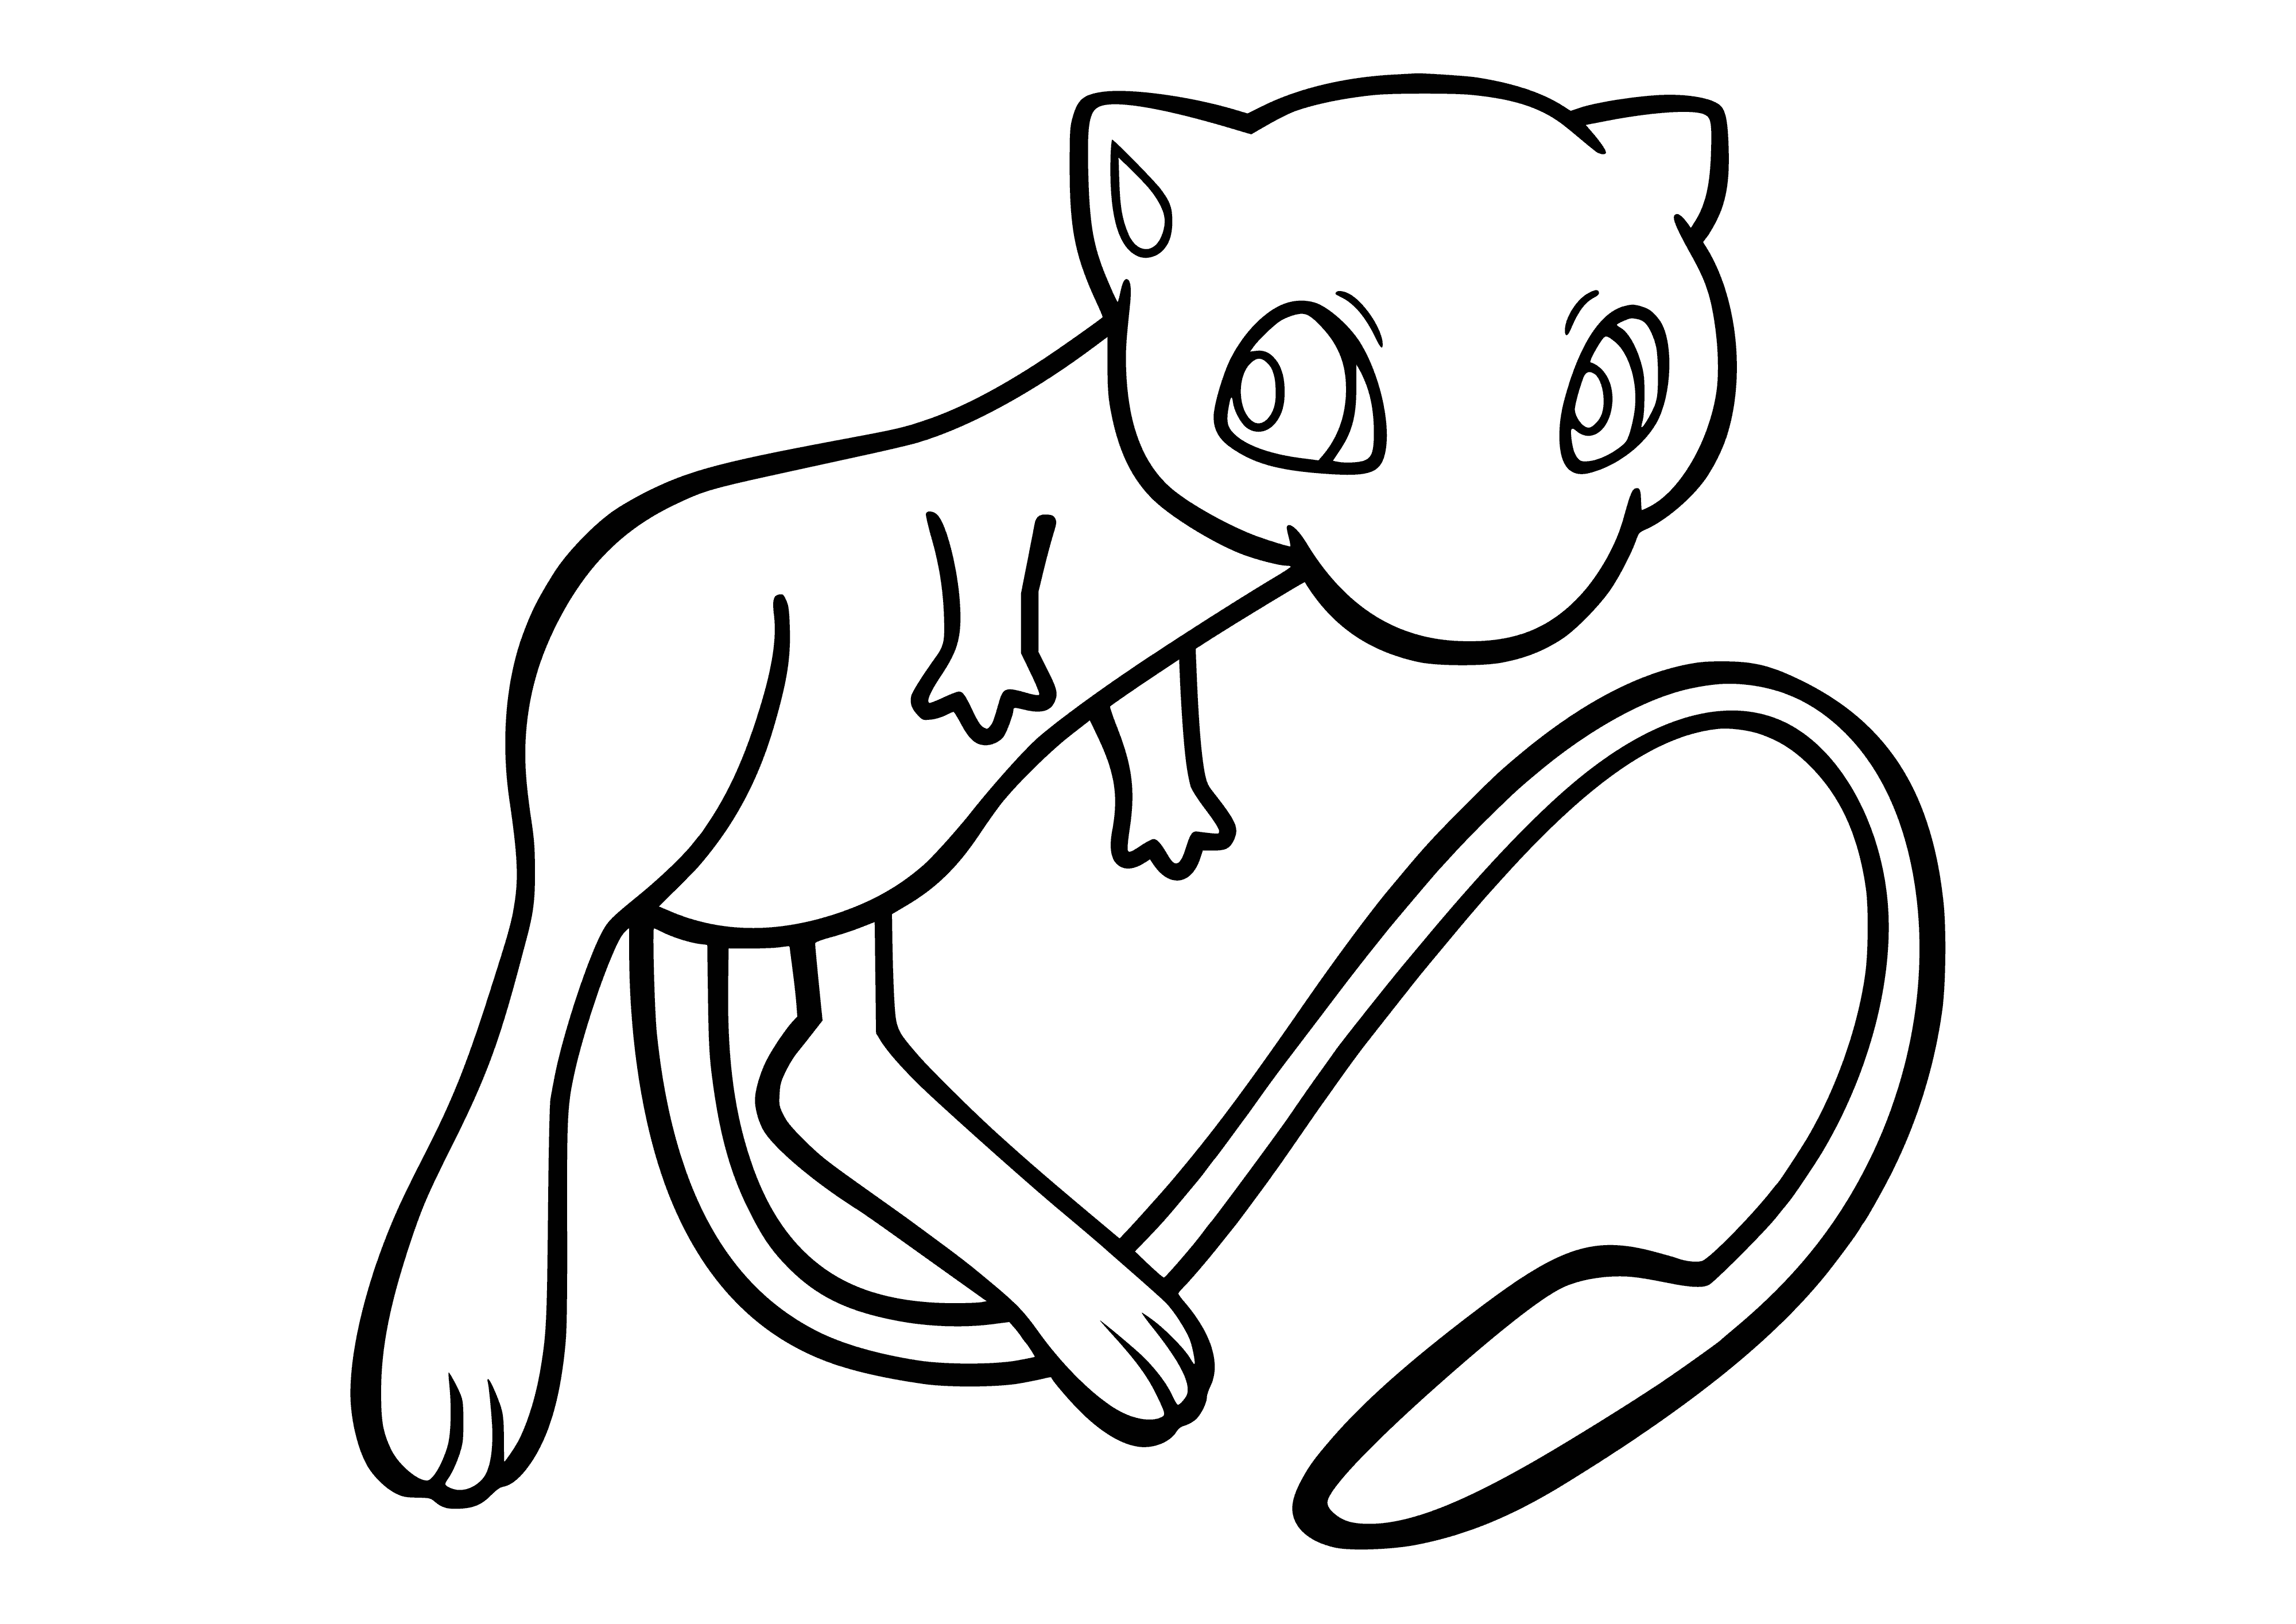 coloring page: Small pink cat-like creature w/ blue eyes, pointy tail & triangle ears in a coloring page.